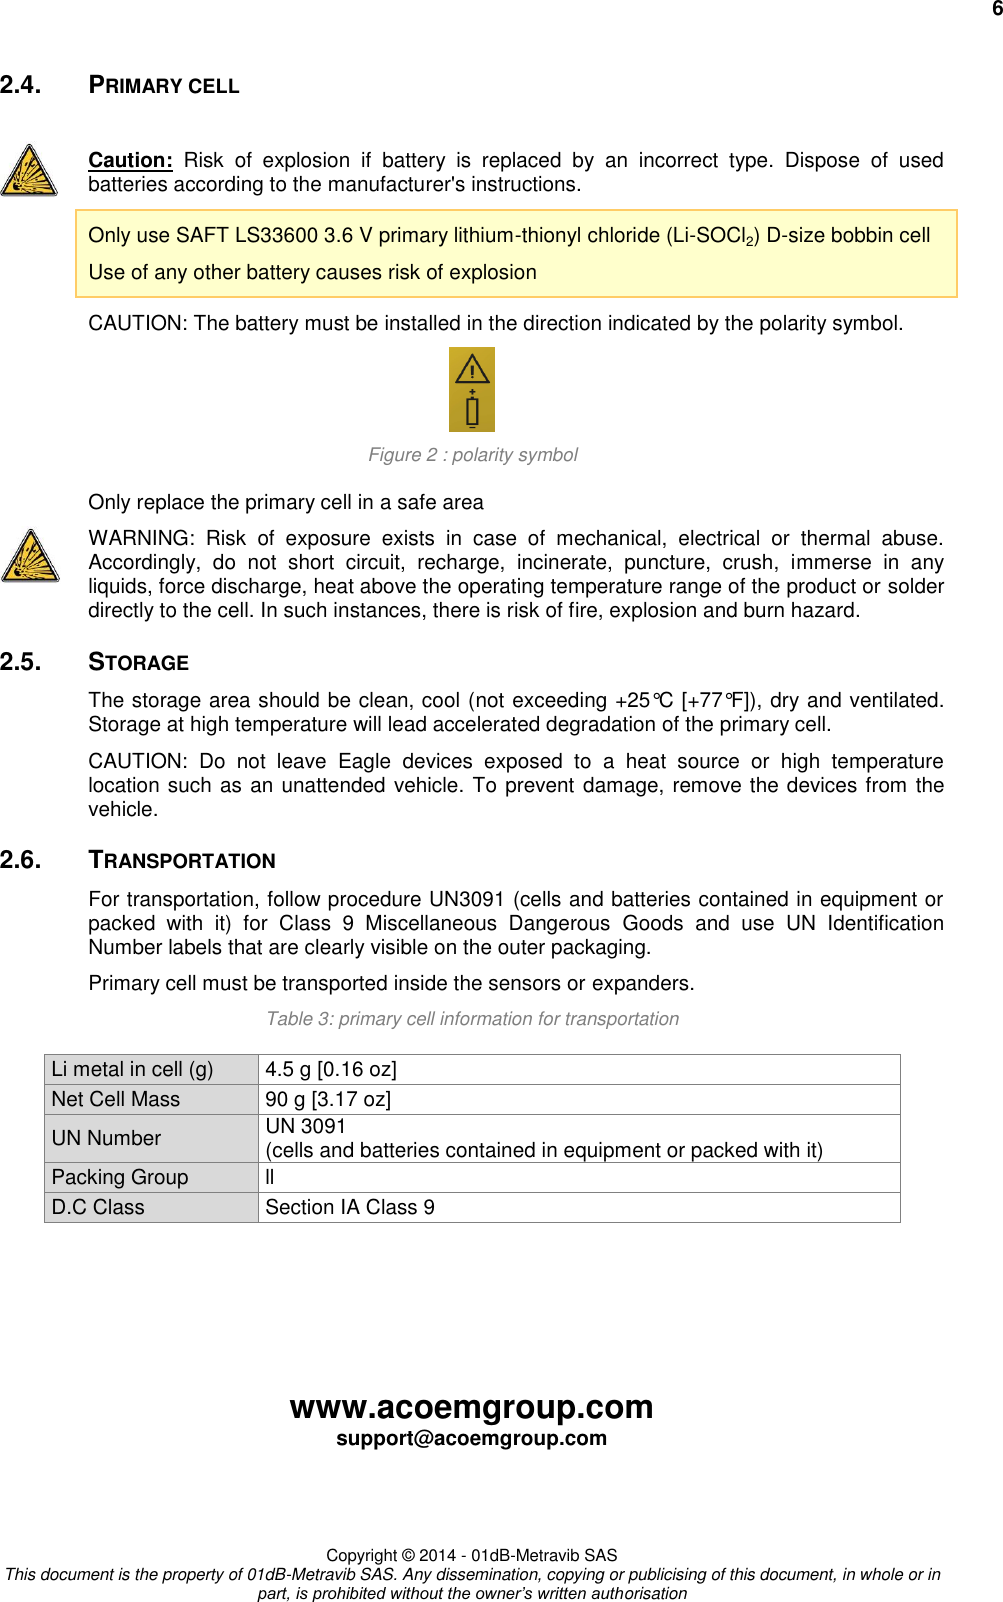     6 www.acoemgroup.com support@acoemgroup.com     Copyright © 2014 - 01dB-Metravib SAS This document is the property of 01dB-Metravib SAS. Any dissemination, copying or publicising of this document, in whole or in part, is prohibited without the owner’s written authorisation 2.4.  PRIMARY CELL  Caution:  Risk  of  explosion  if  battery  is  replaced  by  an  incorrect  type.  Dispose  of  used batteries according to the manufacturer&apos;s instructions. Only use SAFT LS33600 3.6 V primary lithium-thionyl chloride (Li-SOCl2) D-size bobbin cell Use of any other battery causes risk of explosion CAUTION: The battery must be installed in the direction indicated by the polarity symbol.  Figure 2 : polarity symbol Only replace the primary cell in a safe area  WARNING:  Risk  of  exposure  exists  in  case  of  mechanical,  electrical  or  thermal  abuse. Accordingly,  do  not  short  circuit,  recharge,  incinerate,  puncture,  crush,  immerse  in  any liquids, force discharge, heat above the operating temperature range of the product or solder directly to the cell. In such instances, there is risk of fire, explosion and burn hazard. 2.5.  STORAGE The storage area should be clean, cool (not exceeding +25°C [+77°F]), dry and ventilated. Storage at high temperature will lead accelerated degradation of the primary cell. CAUTION:  Do  not  leave  Eagle  devices  exposed  to  a  heat  source  or  high  temperature location such as an unattended vehicle. To prevent damage, remove the devices from the vehicle. 2.6.  TRANSPORTATION For transportation, follow procedure UN3091 (cells and batteries contained in equipment or packed  with  it)  for  Class  9  Miscellaneous  Dangerous  Goods  and  use  UN  Identification Number labels that are clearly visible on the outer packaging. Primary cell must be transported inside the sensors or expanders. Table 3: primary cell information for transportation Li metal in cell (g) 4.5 g [0.16 oz] Net Cell Mass 90 g [3.17 oz] UN Number UN 3091 (cells and batteries contained in equipment or packed with it) Packing Group ll D.C Class Section IA Class 9    